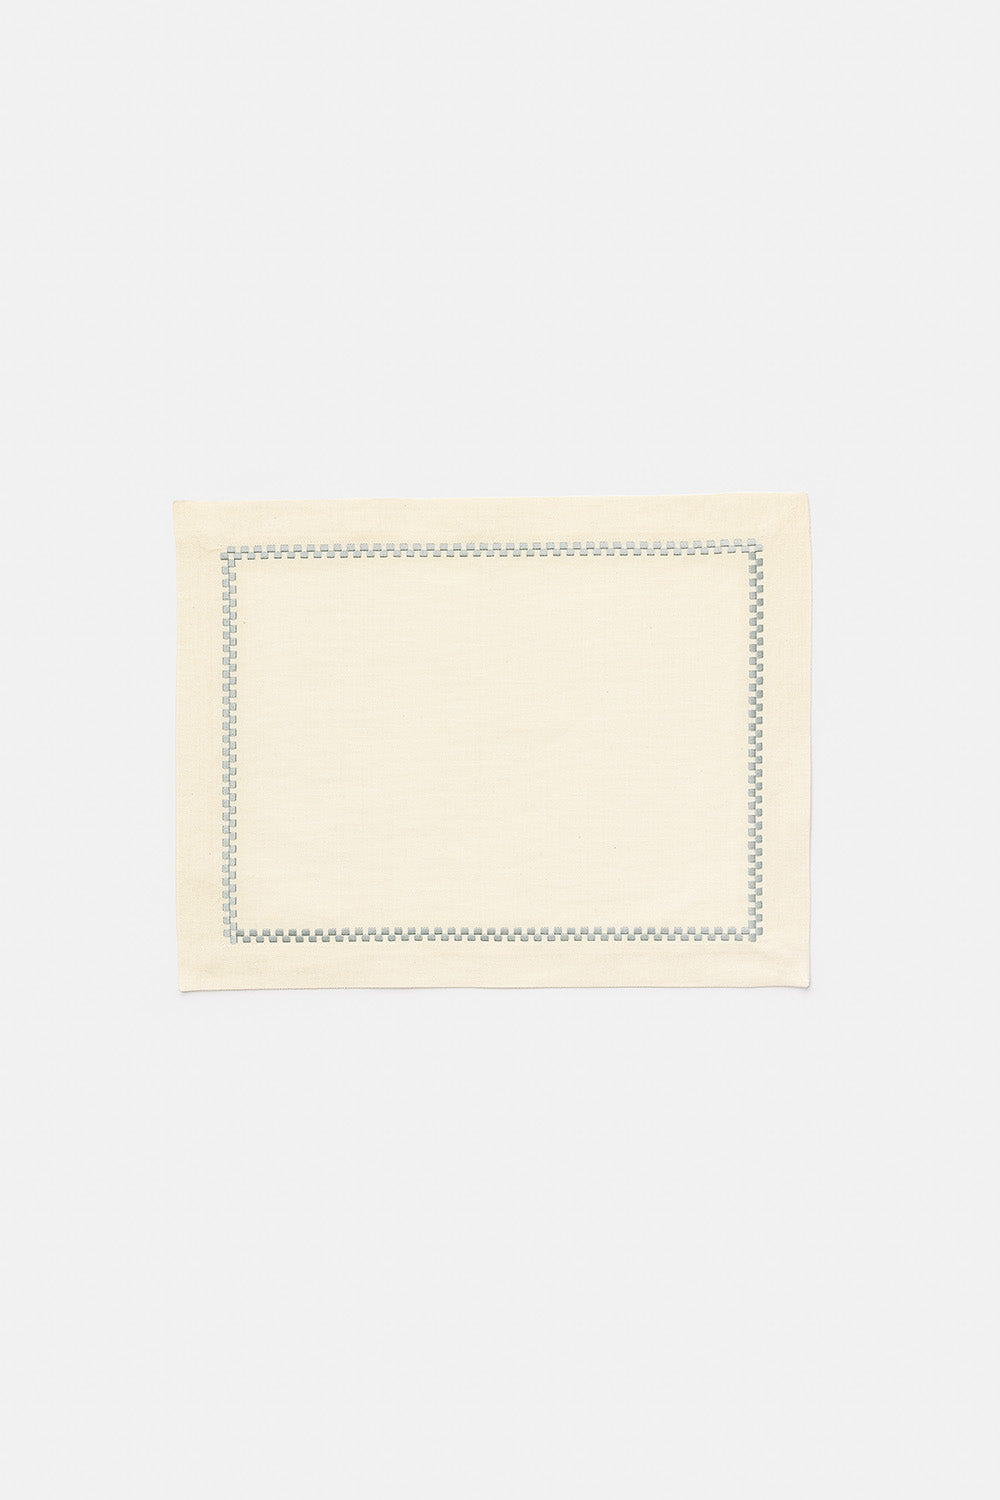 "Ricamo" placemat in White / Cendre Grey